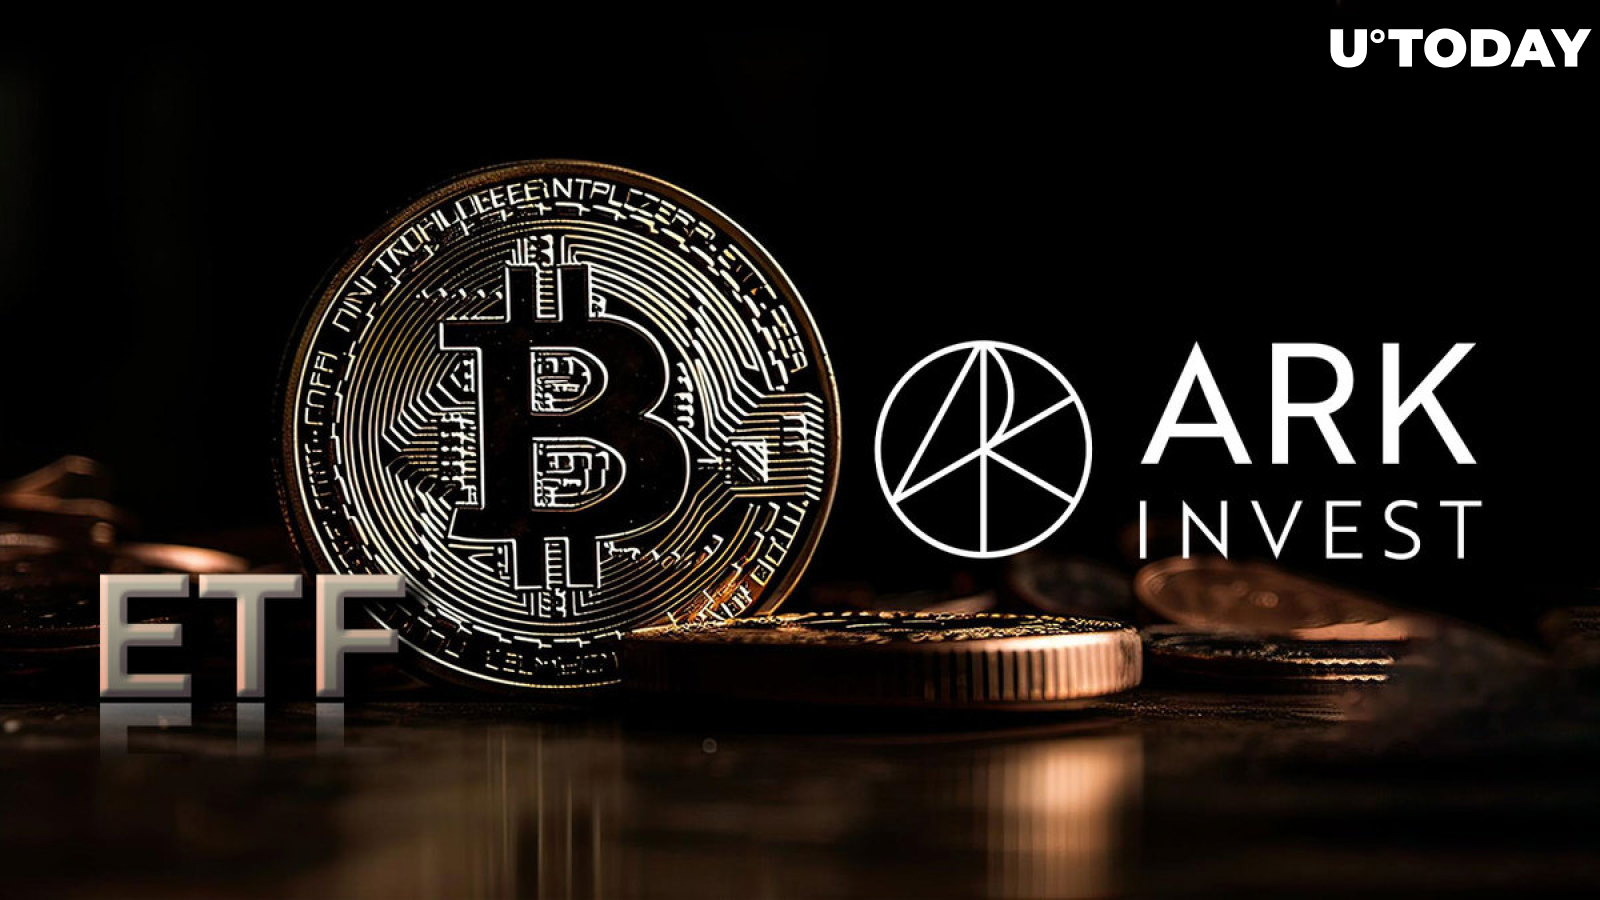 Ark Invest Updates Spot Bitcoin ETF Application, Is Approval Likely?